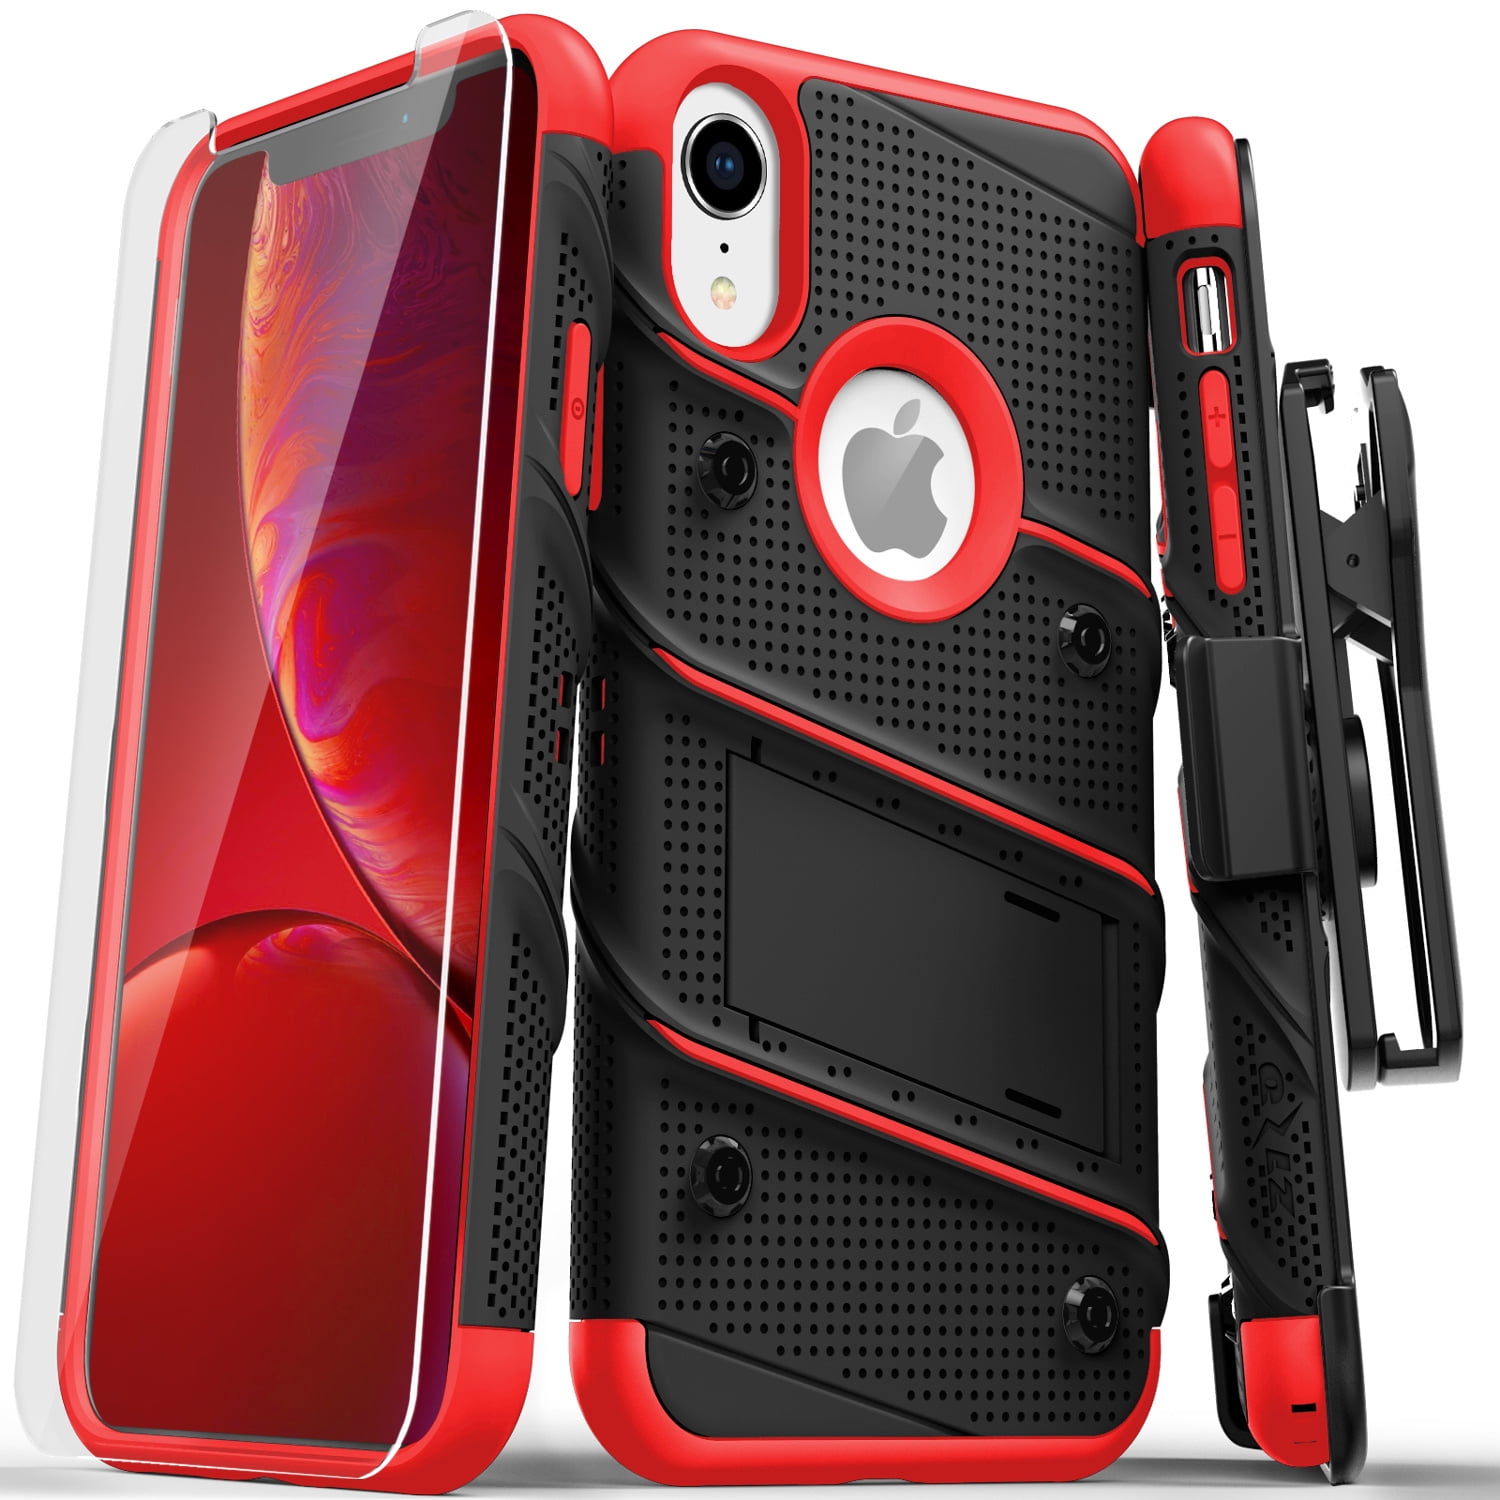 ZIZO Bolt Case for iPhone XR with Kickstand and Lanyard Black